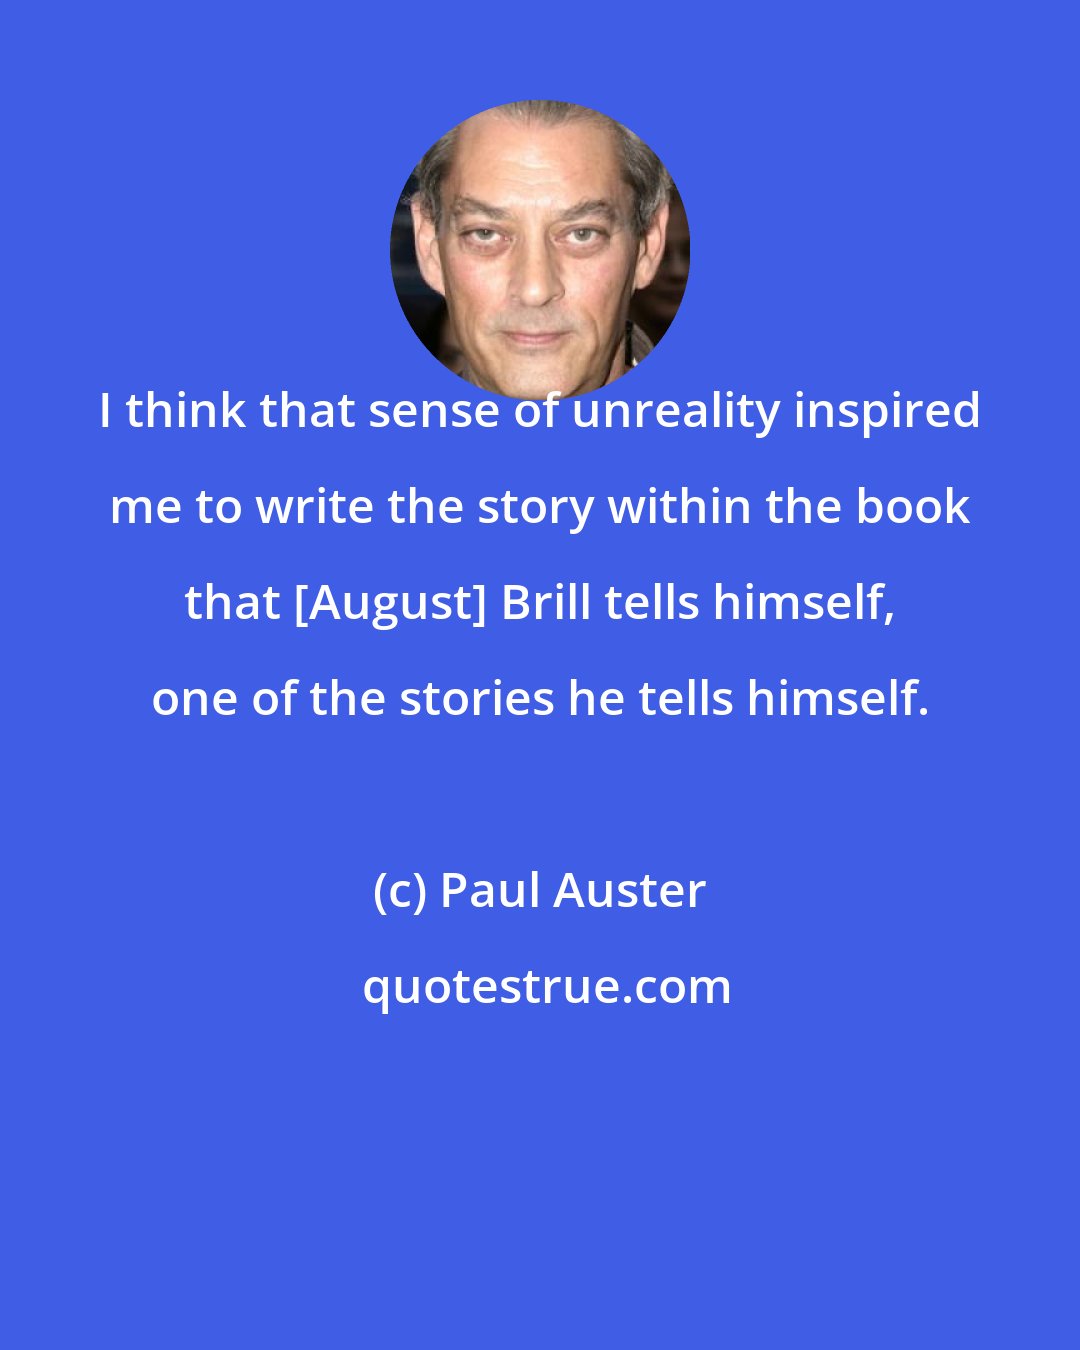 Paul Auster: I think that sense of unreality inspired me to write the story within the book that [August] Brill tells himself, one of the stories he tells himself.